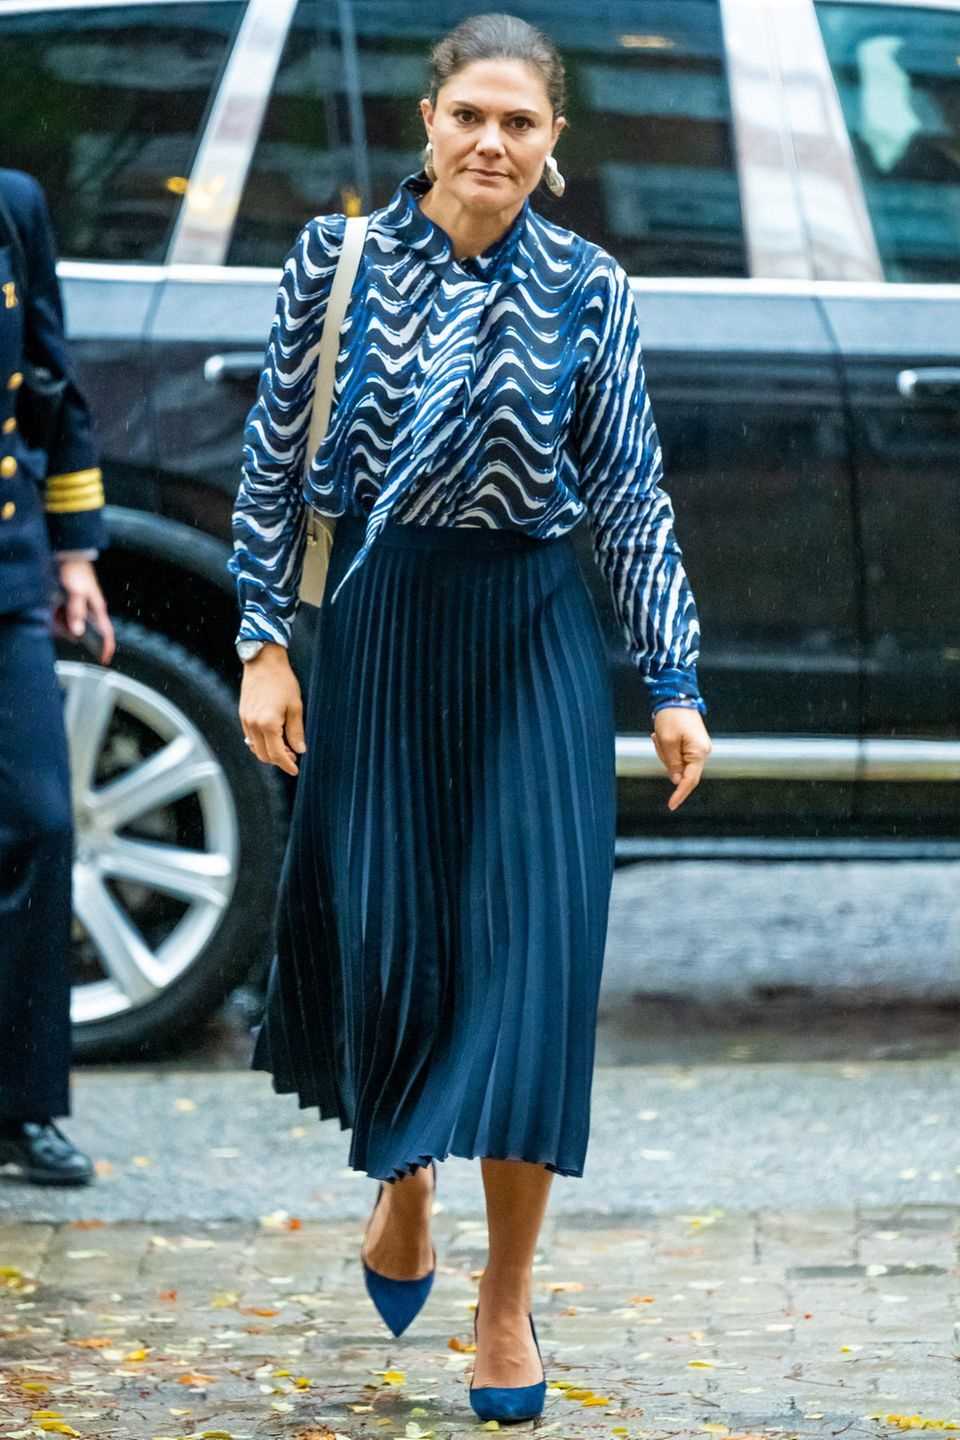 Pleated skirt with a bow tie blouse - the look makes Victoria older